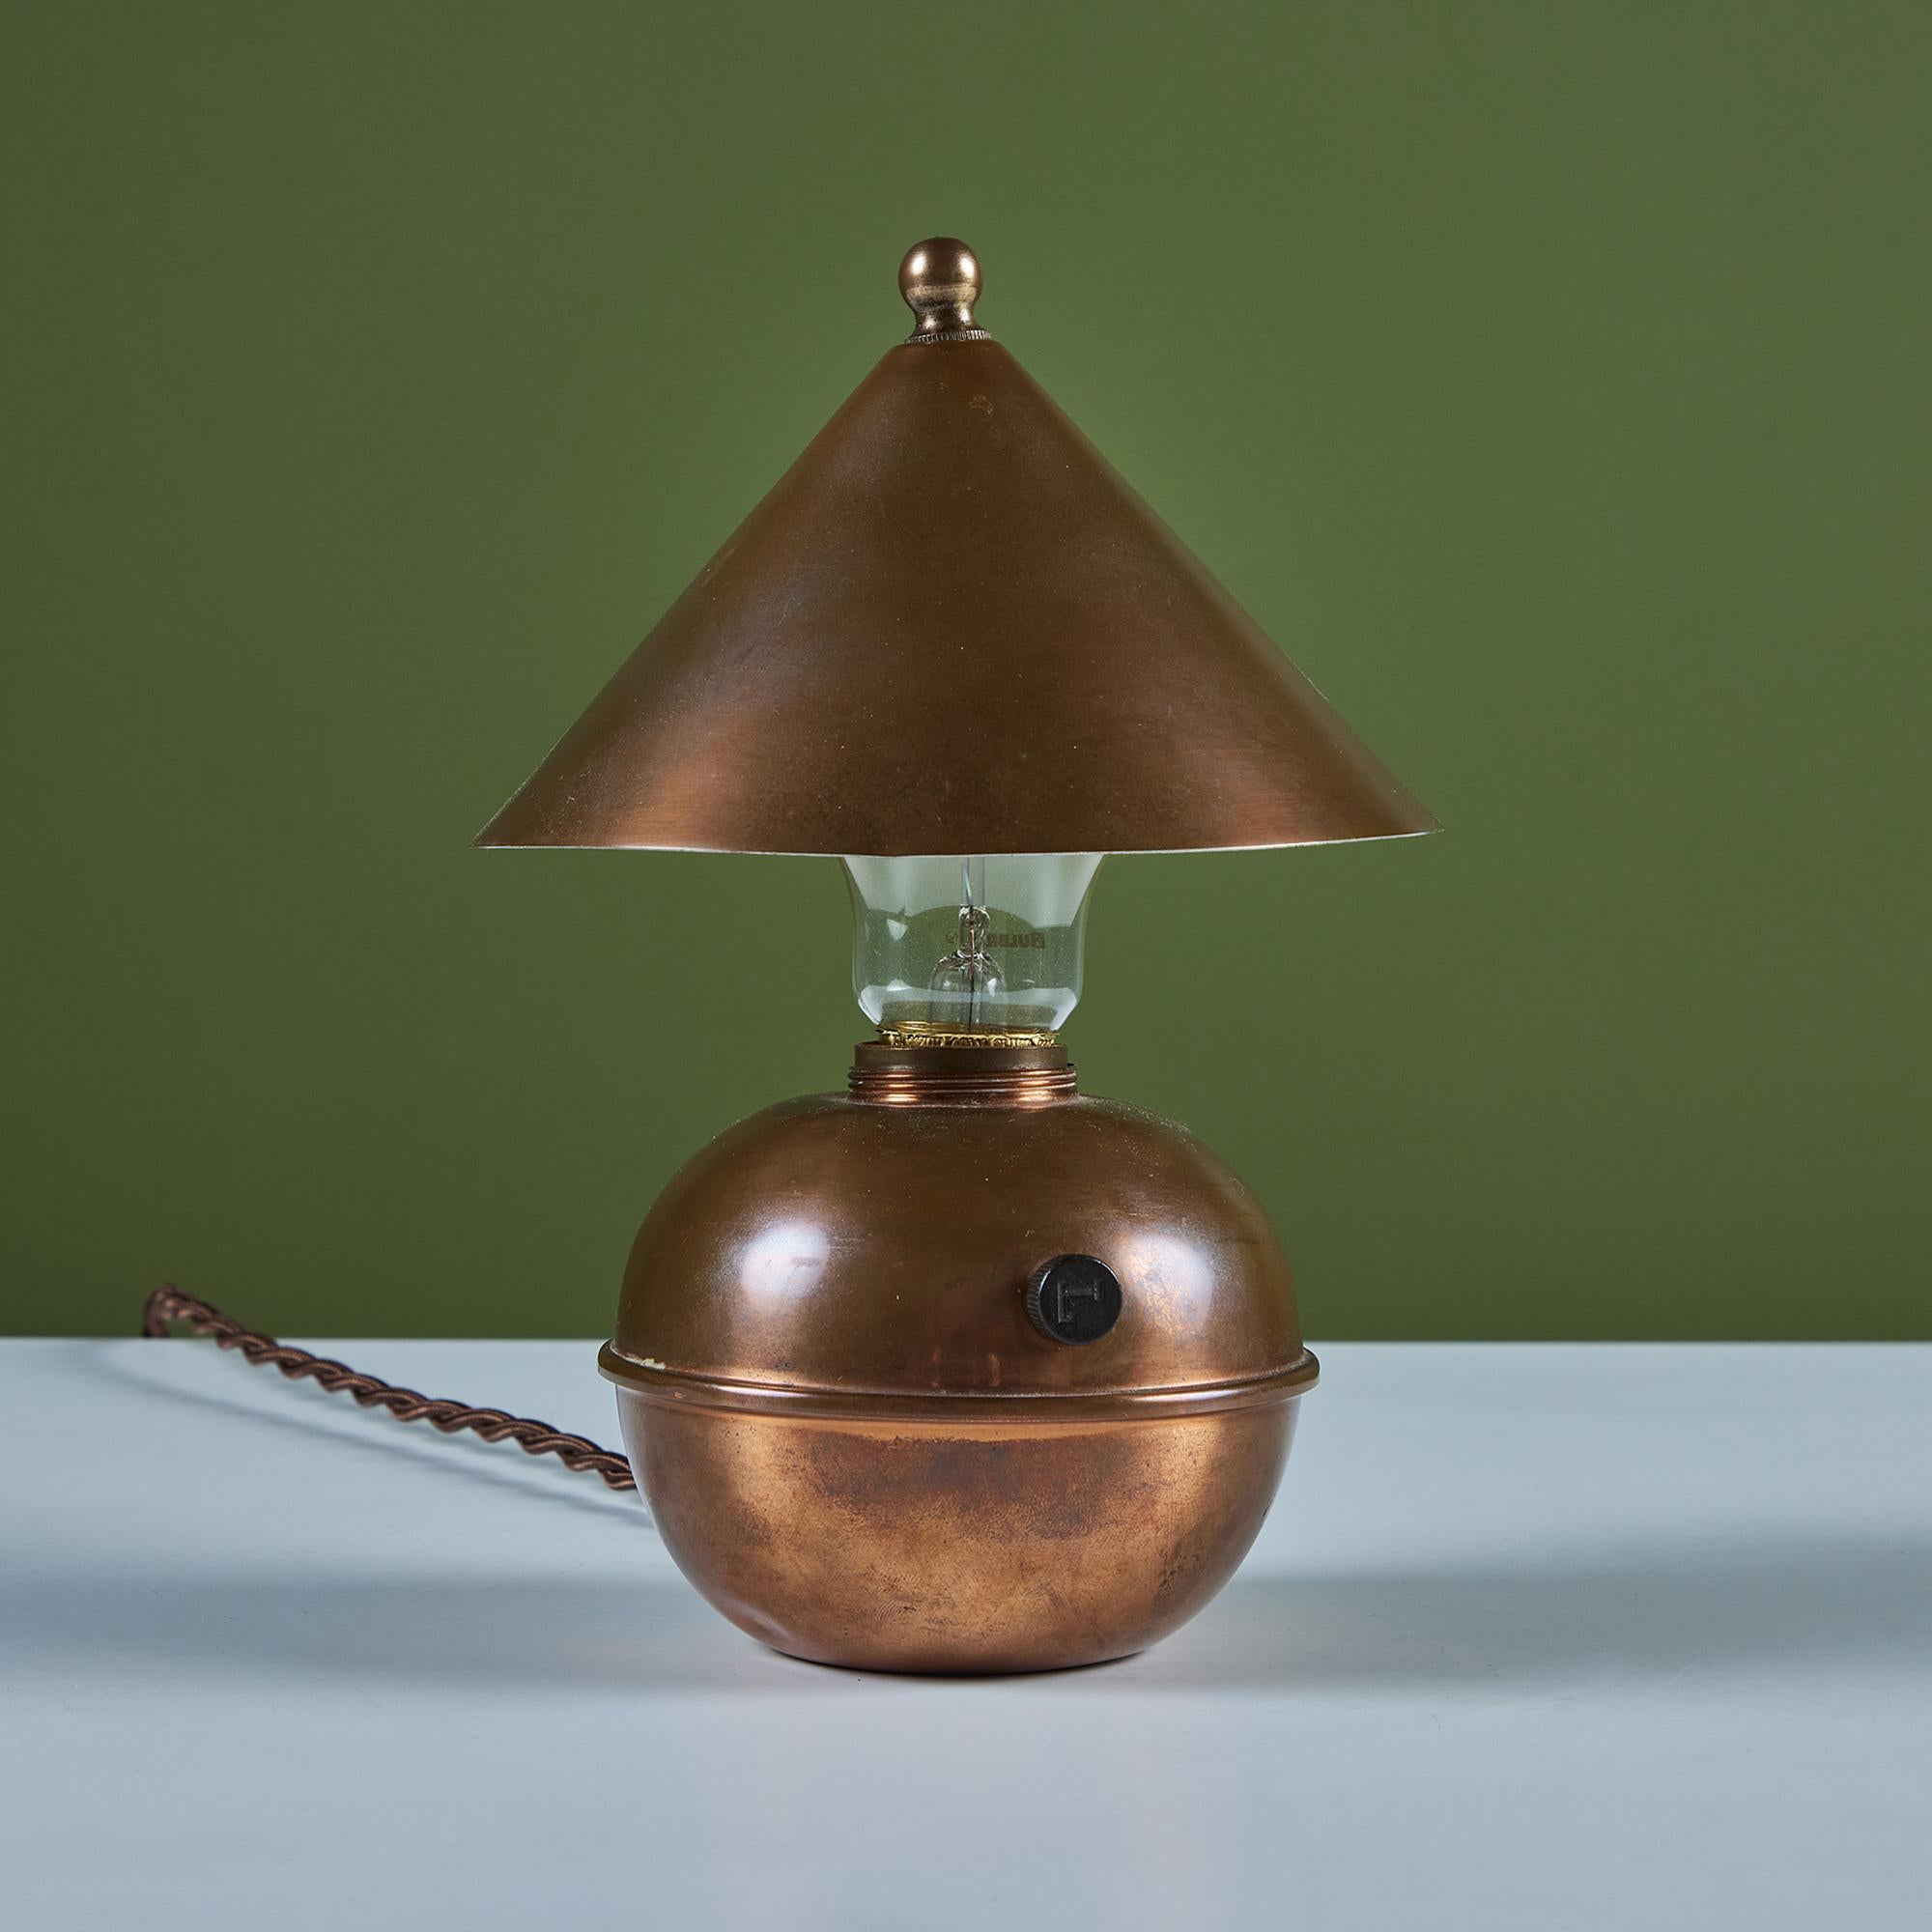 Petite copper table lamp by Ruth Gerth for Chase, c.1930s, USA. The Art Deco lamp features a cone shaped shade and bulb body in patinated copper. The minimalist design is playful and a fun piece to add to a shelf or desk.

Impressed with [Chase] and